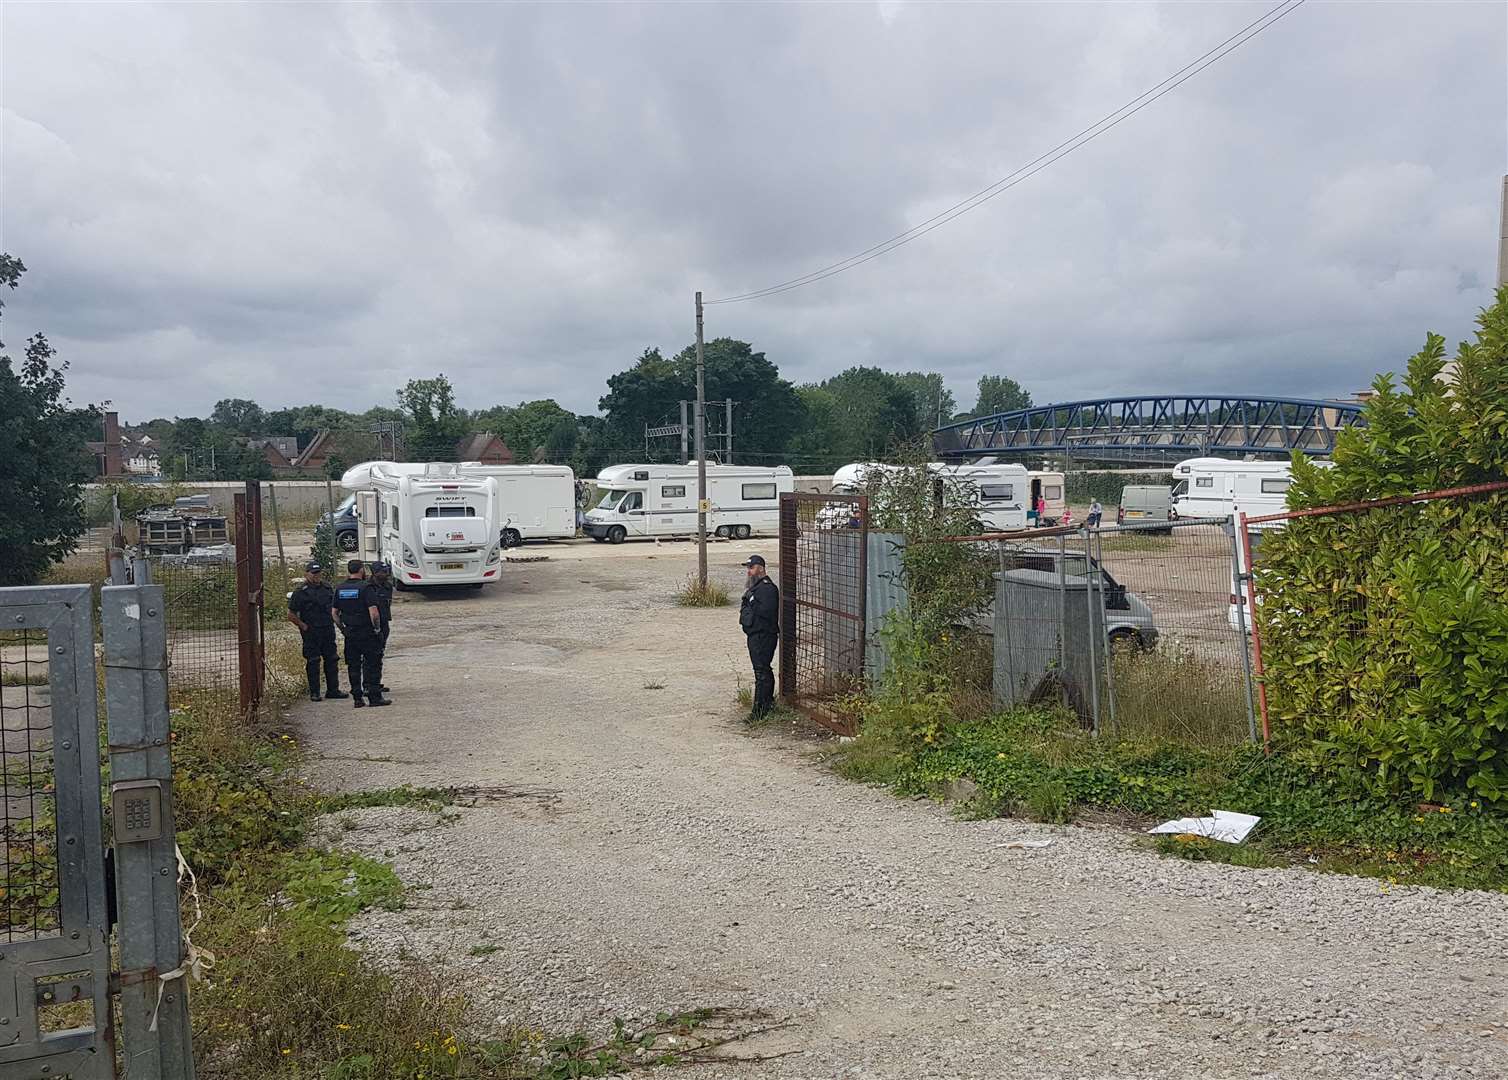 Bailiffs stationed at the entrance to the traveller camp